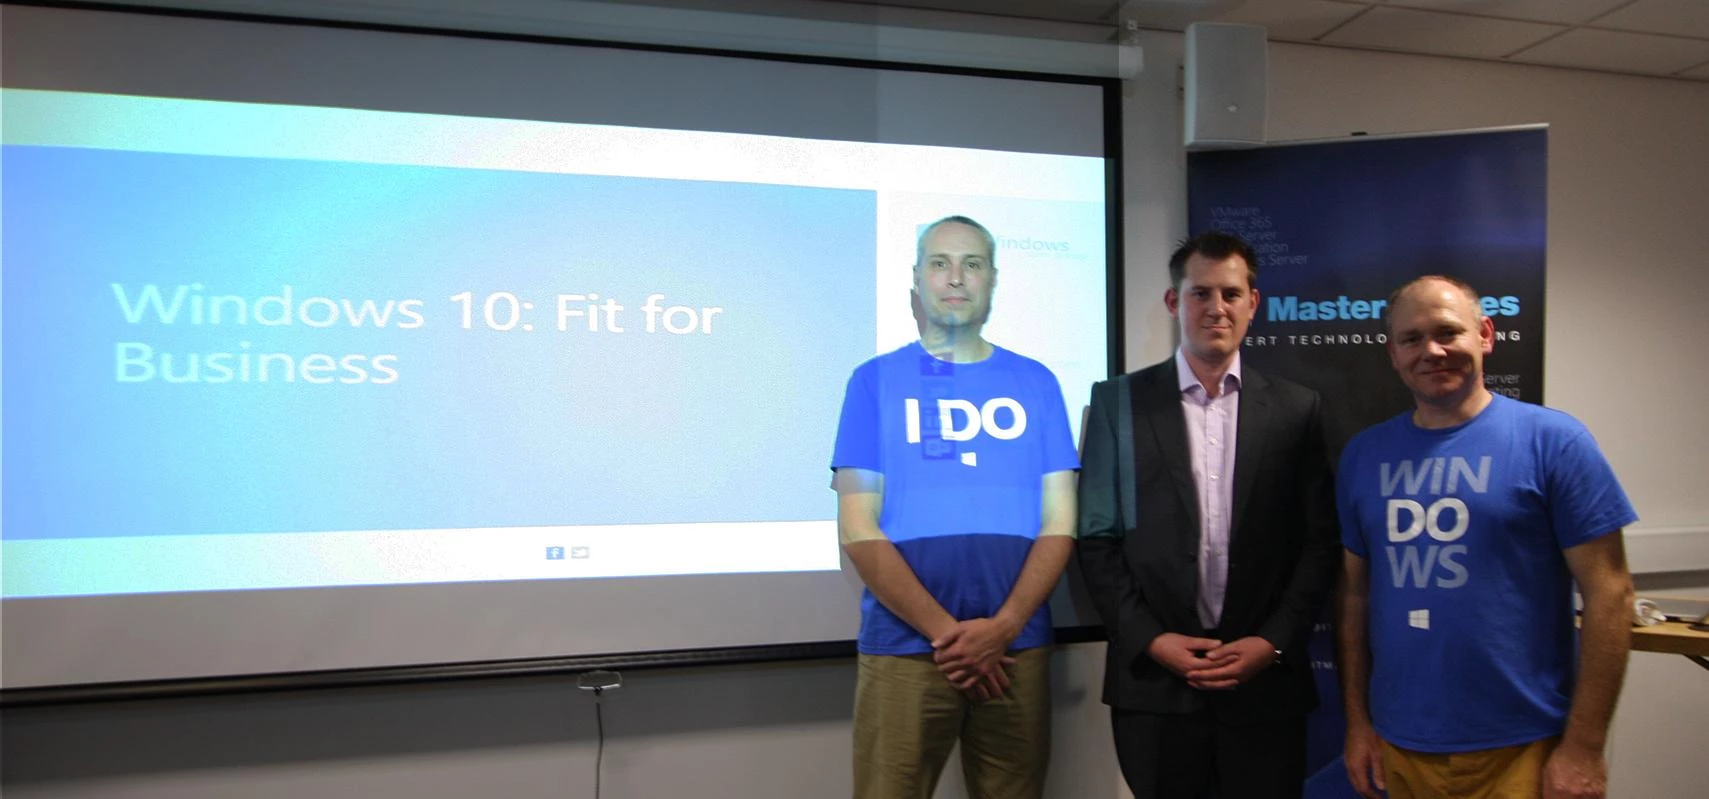 Ryan Mangan, MD of Systech IT Solutions, who co-hosted the Windows 10 User Training event alongside 